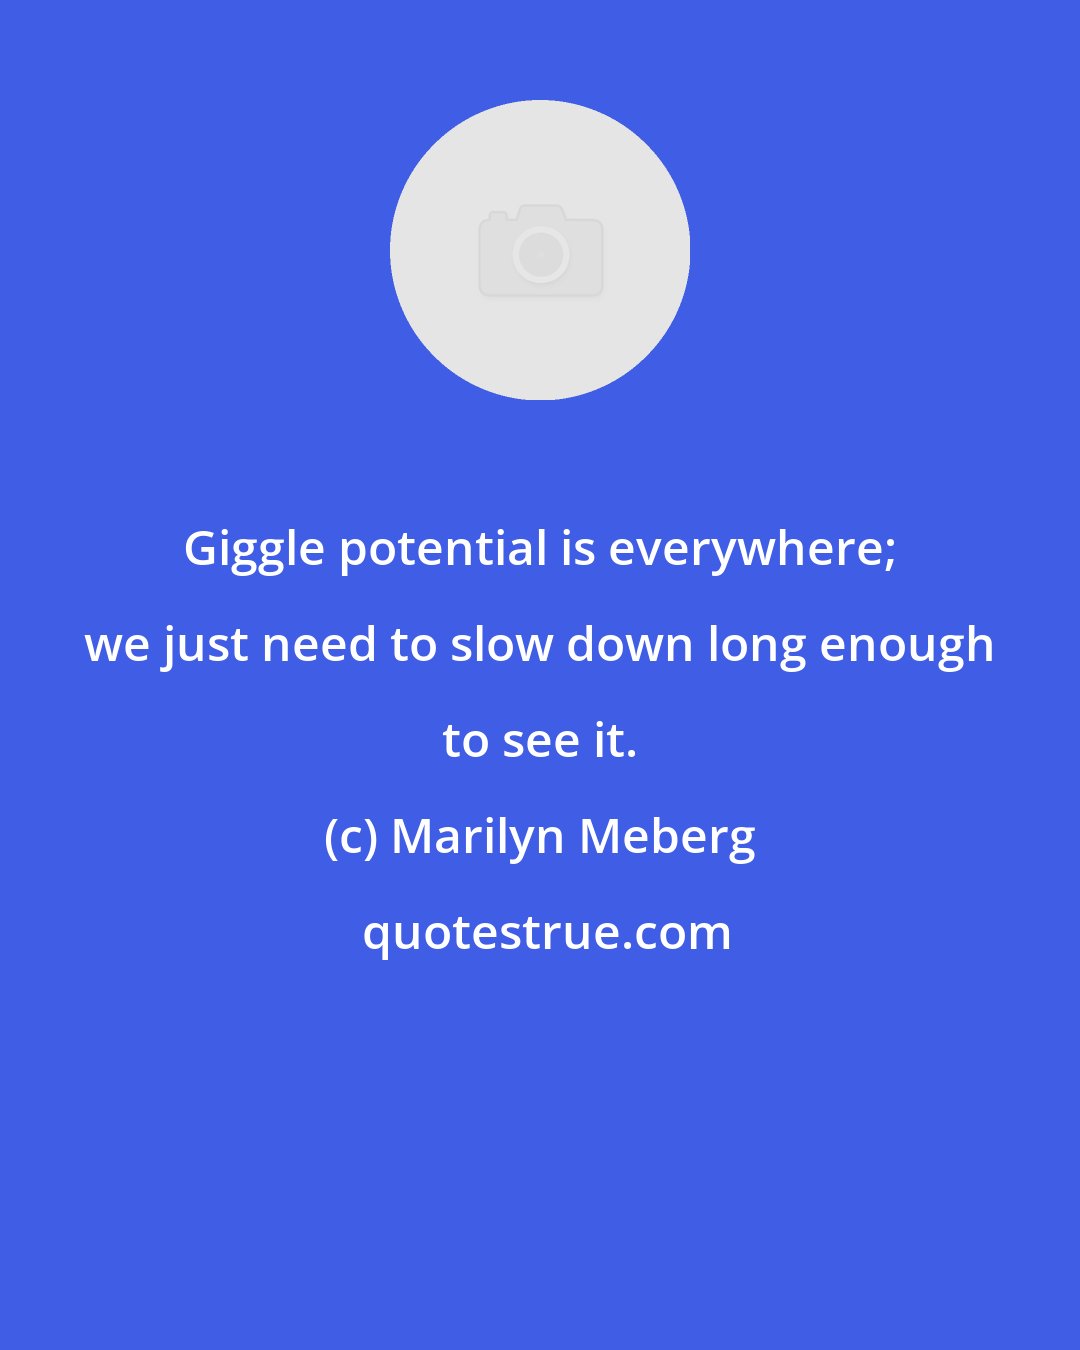 Marilyn Meberg: Giggle potential is everywhere; we just need to slow down long enough to see it.